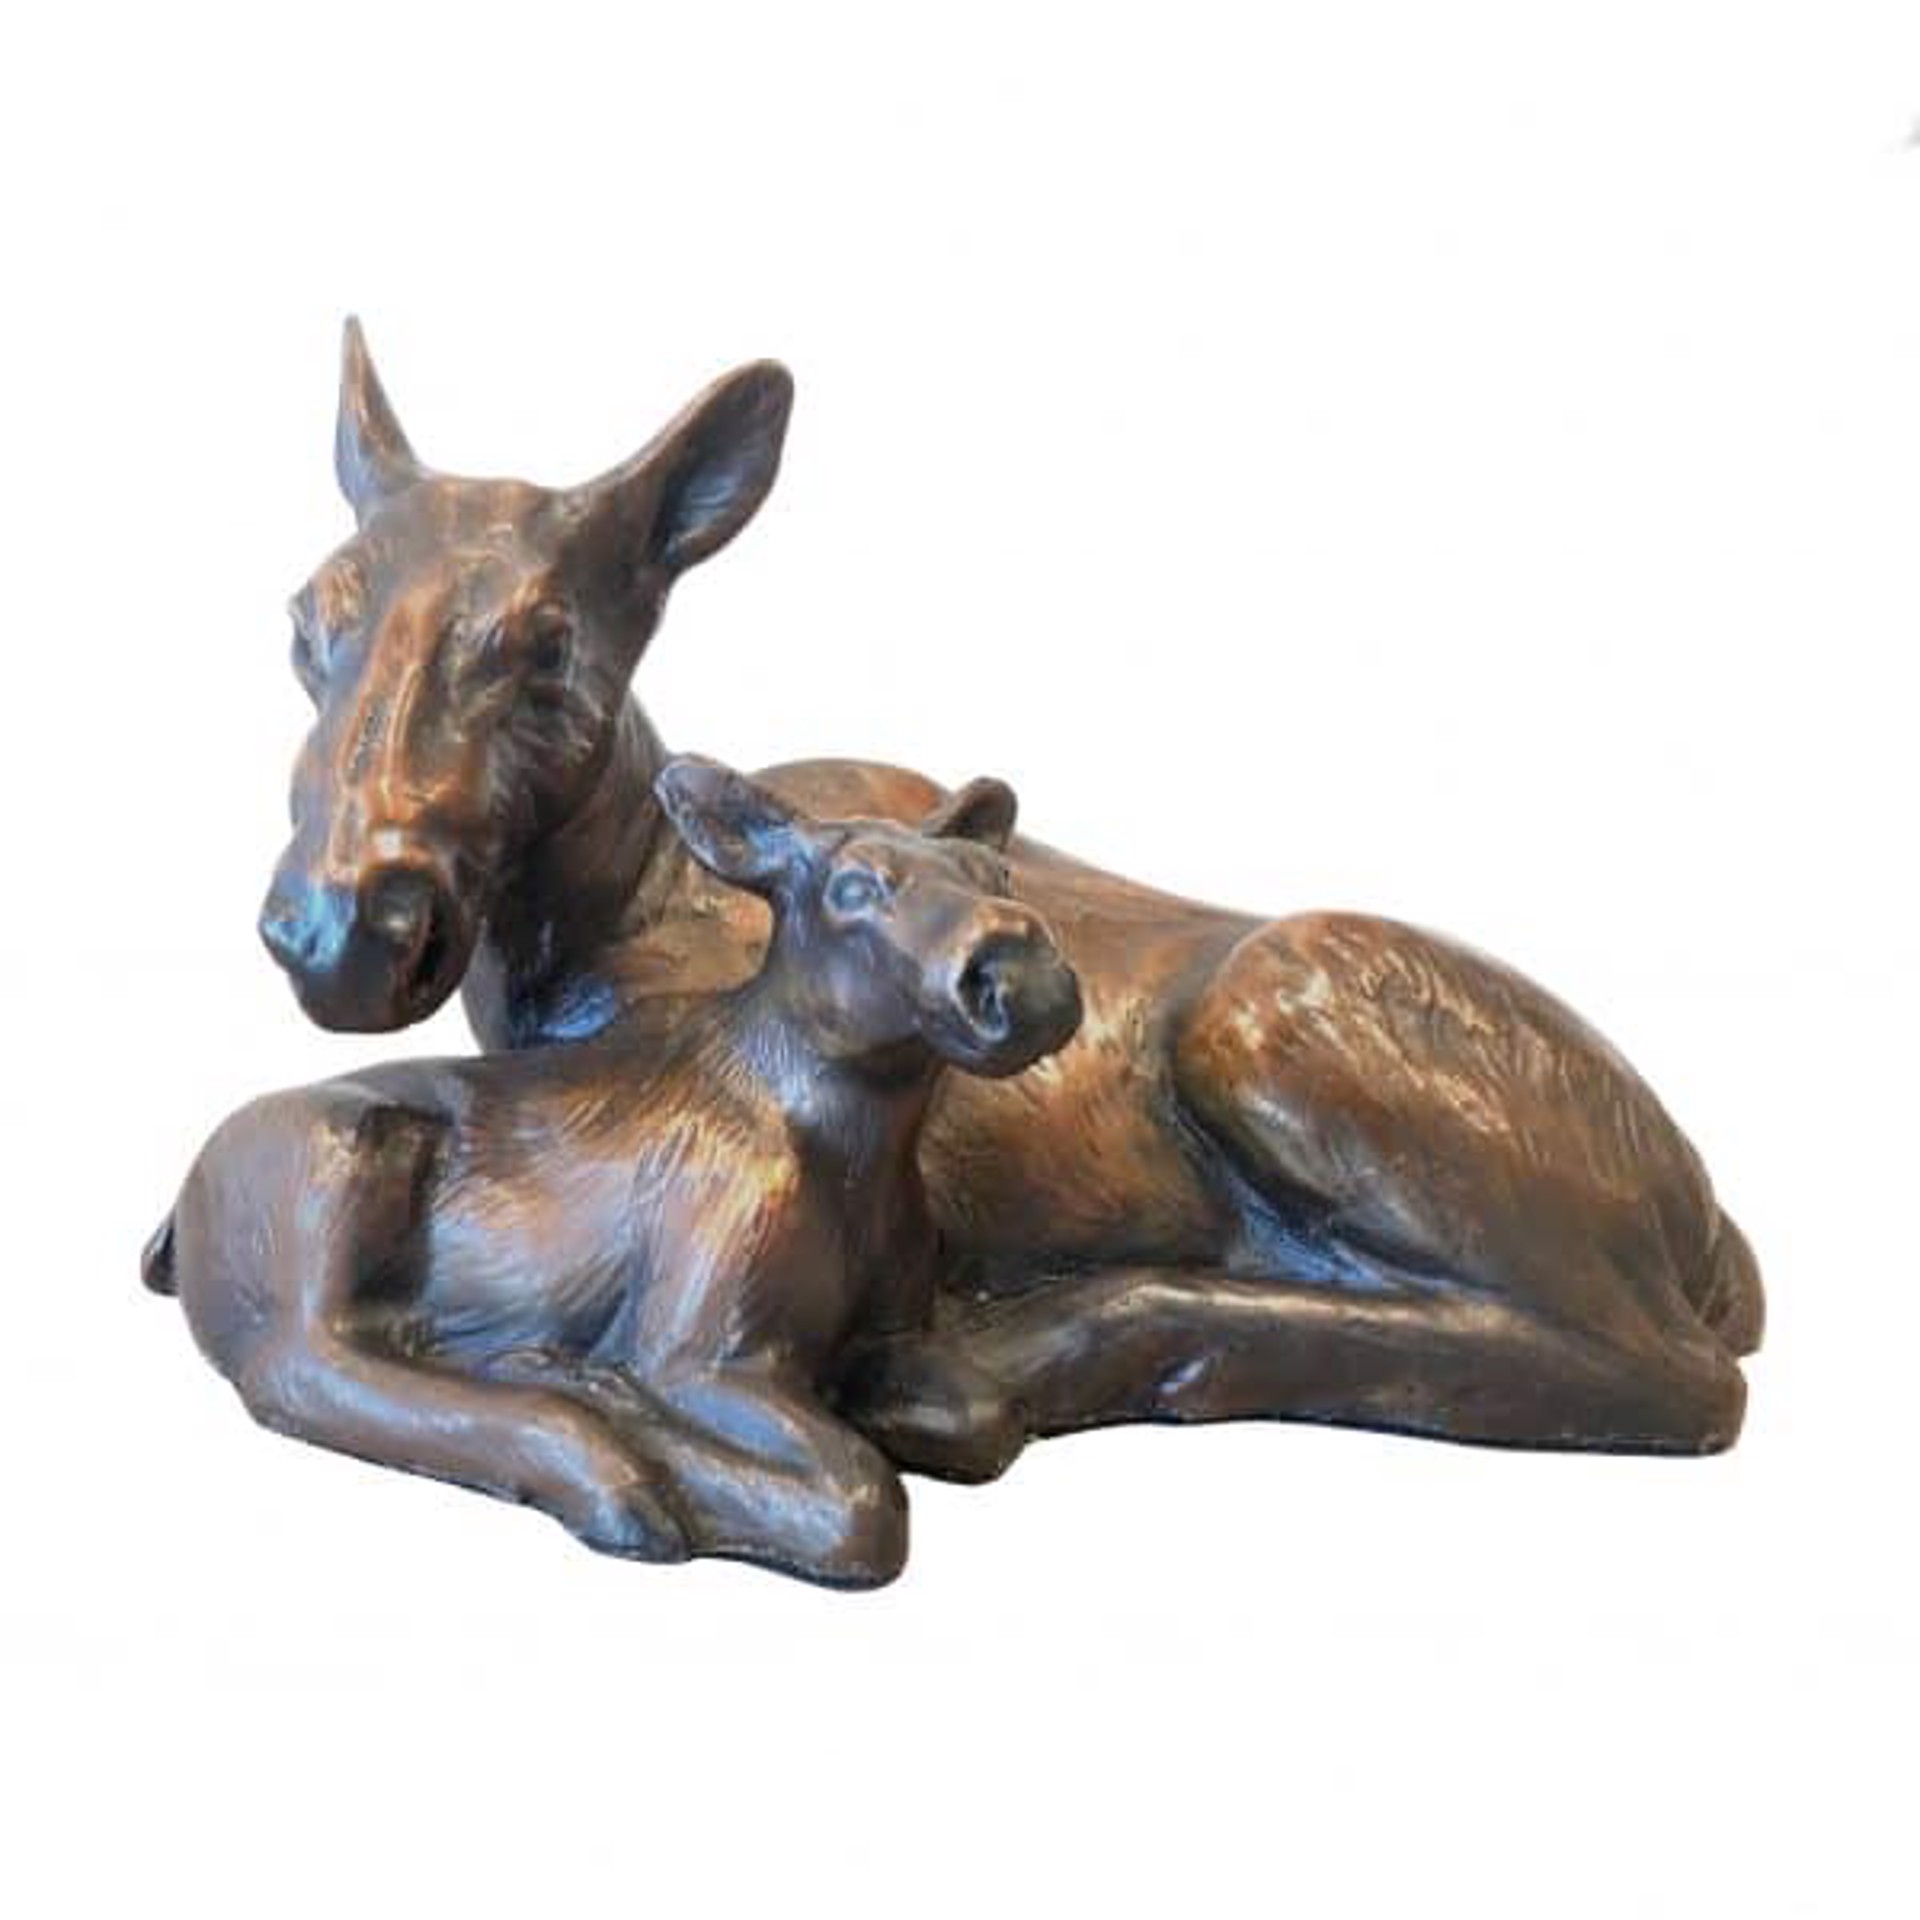 A Bronze Sculpture Of A Cow Moose And Her Calf By Rip And Alison Caswell